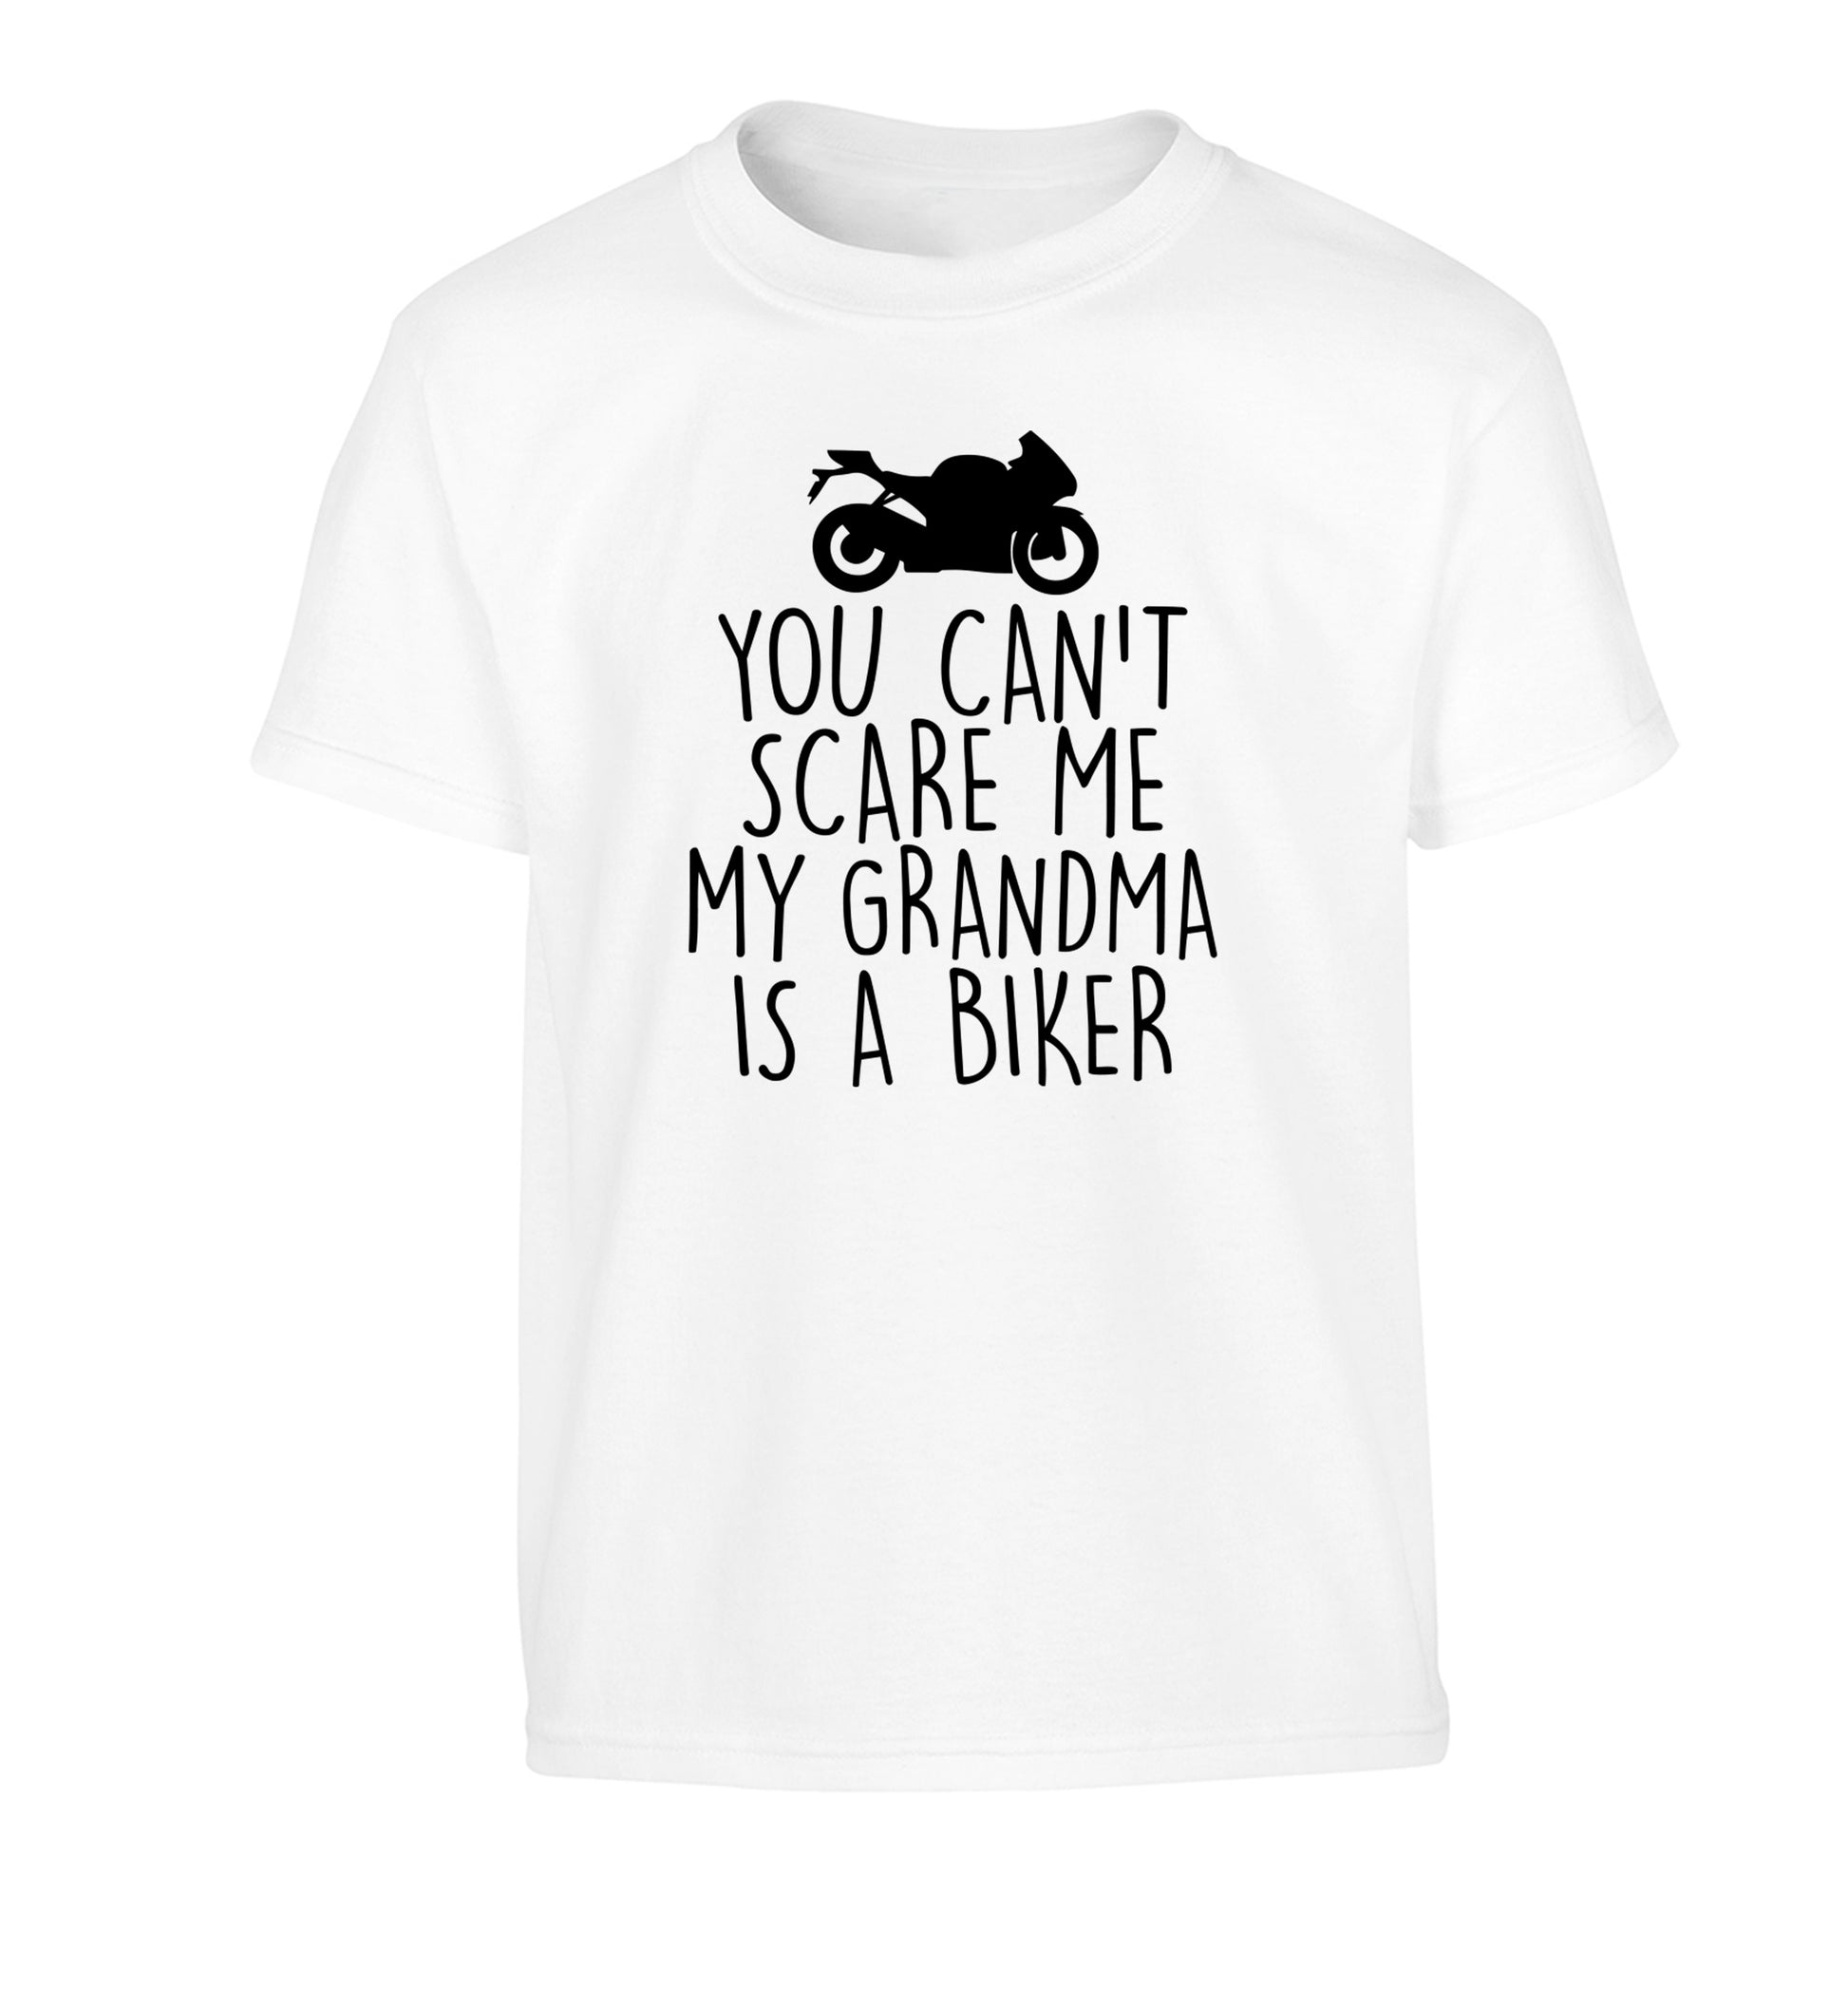 You can't scare me my grandma is a biker Children's white Tshirt 12-13 Years